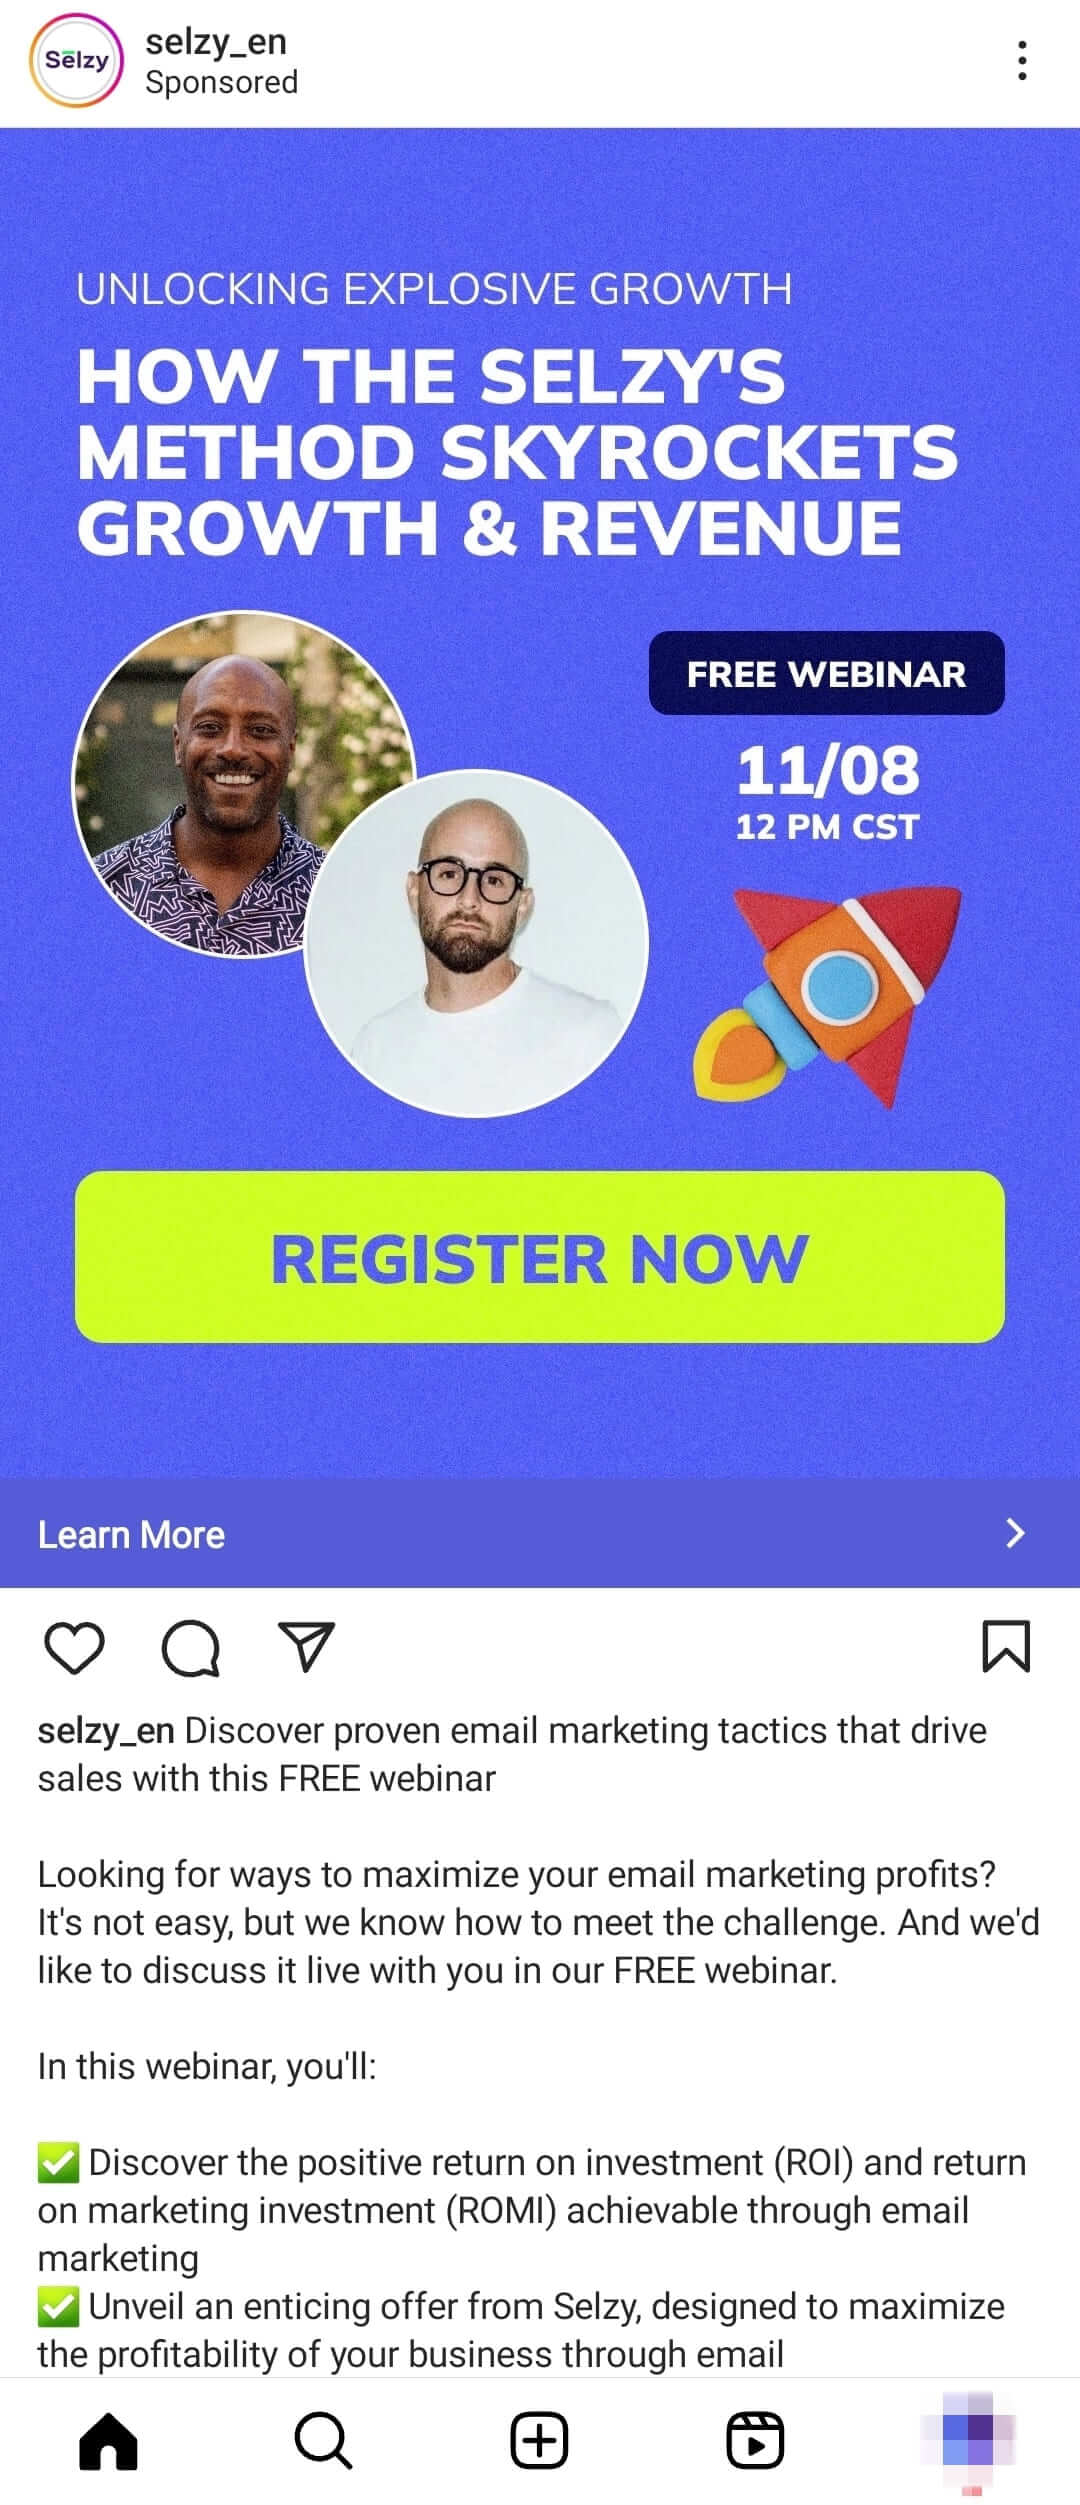 An Instagram ad promoting Selzy’s webinar on email marketing tactics that drive sales